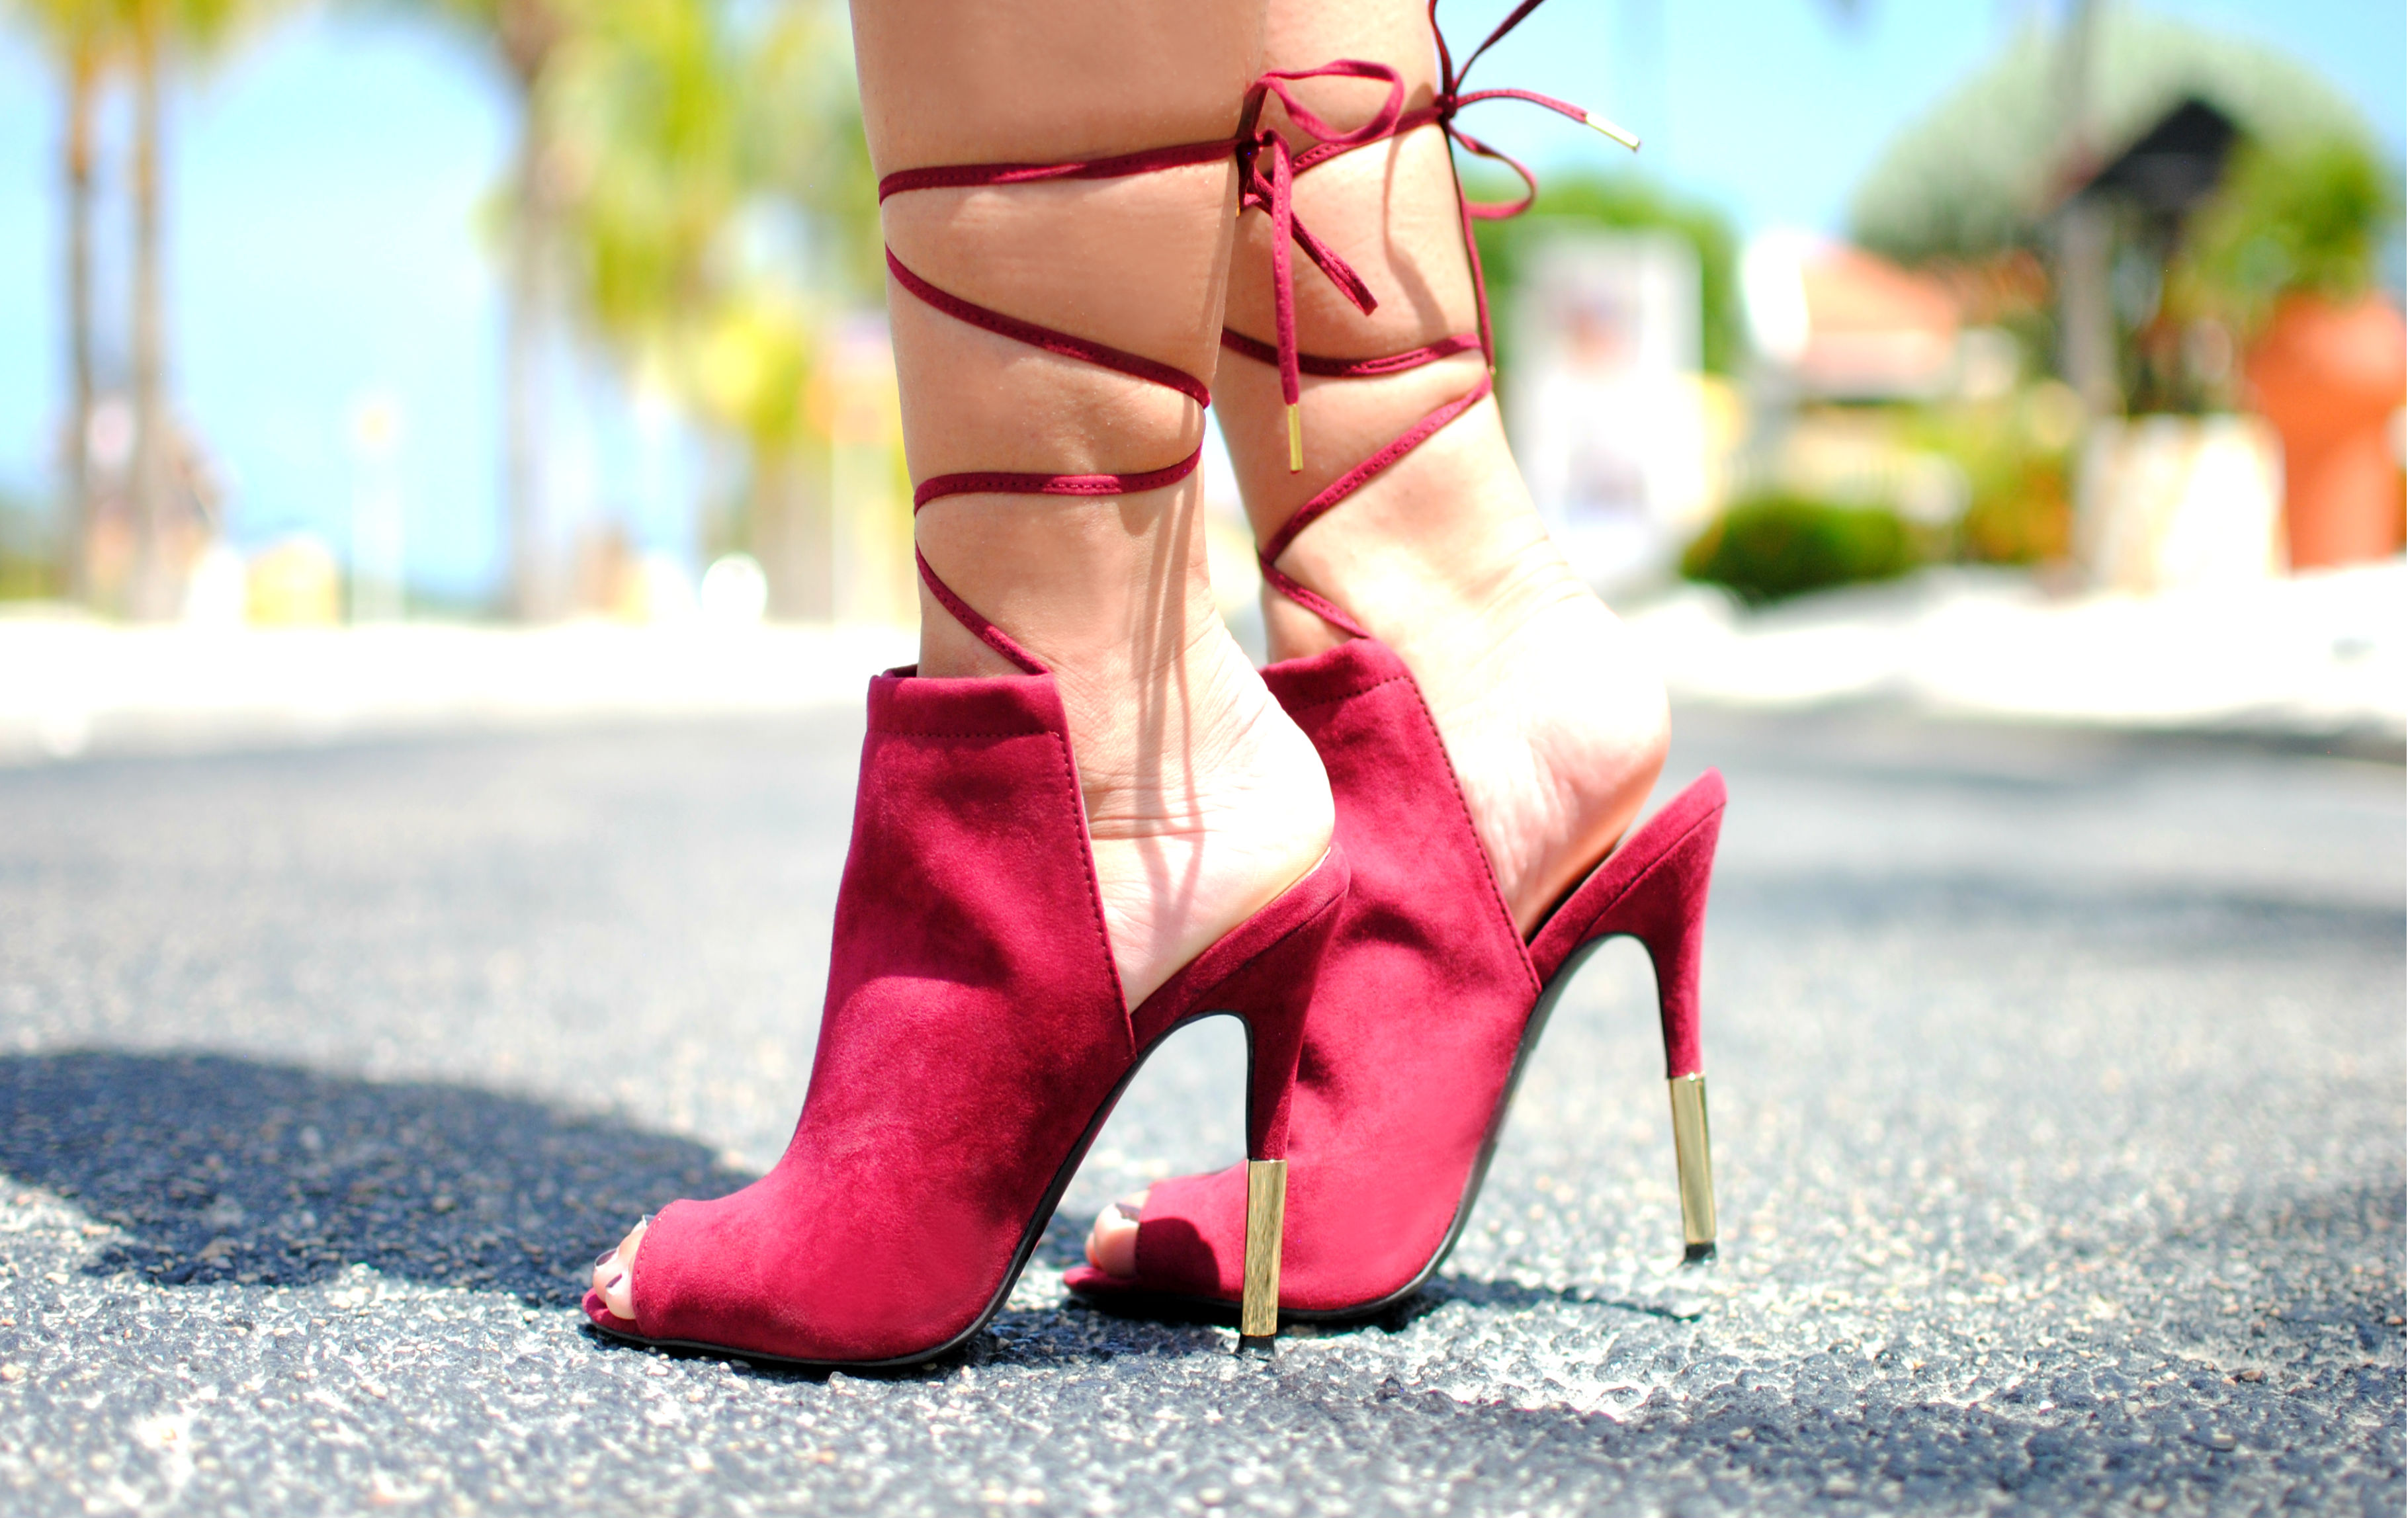 Agaci_Lace up Booties_What Would V Wear